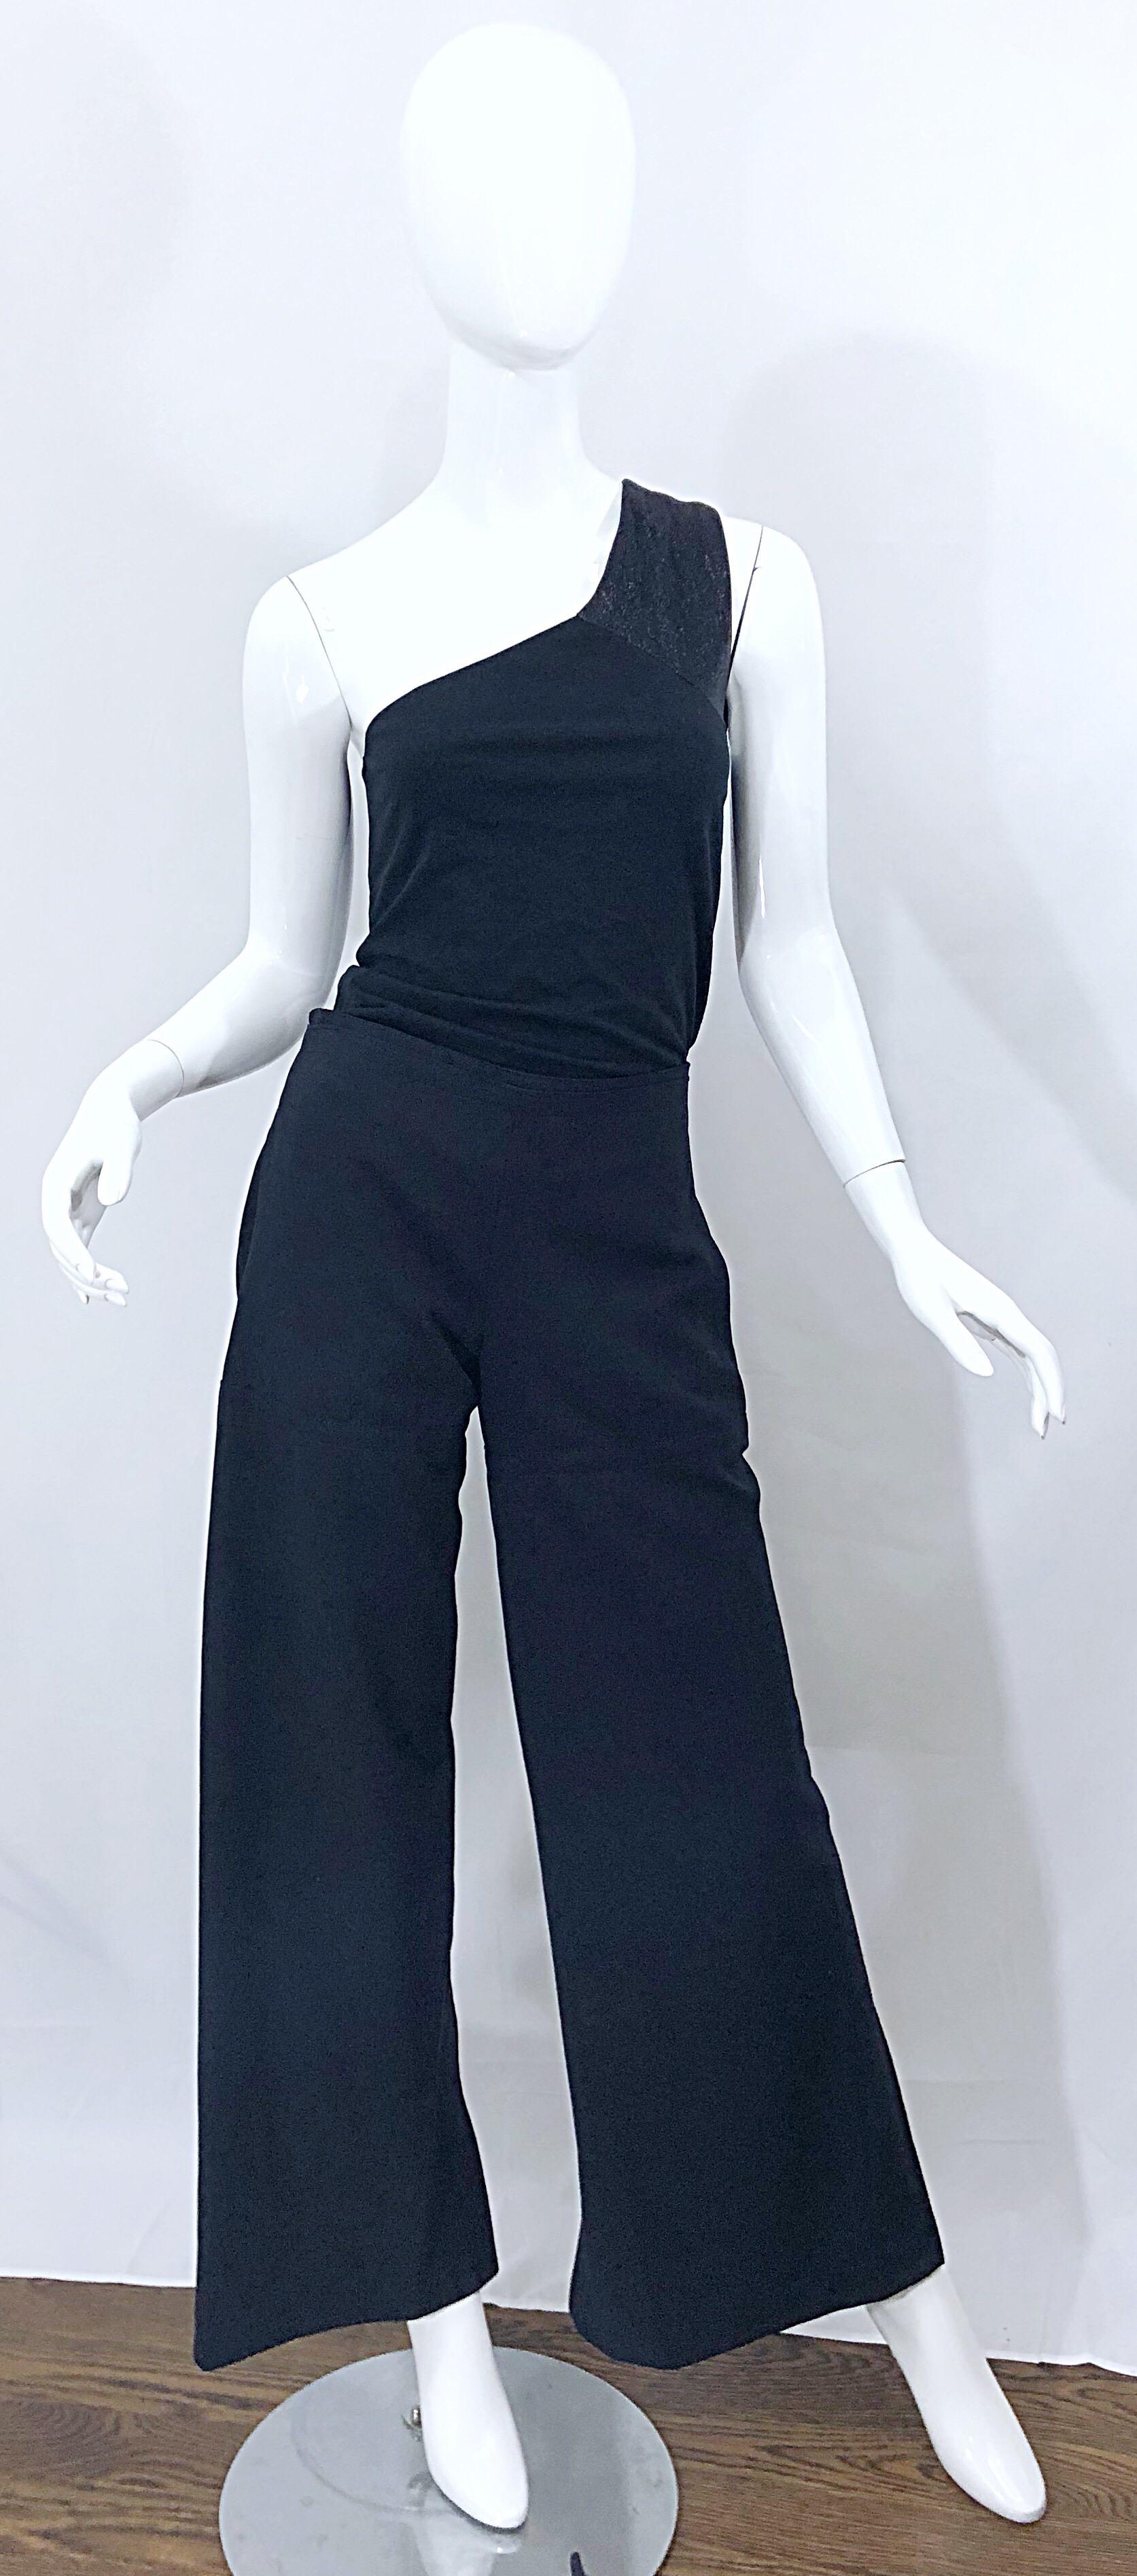 Rare Y2K DIRK BIKKEMBERGS black wool blend zip-up high waisted pants! Features an Avant Garde flattering fit. Velcro straps at each side of the back waist can adjust to fit an array of sizes. Pockets at each side of the hips. Can easily be dressed